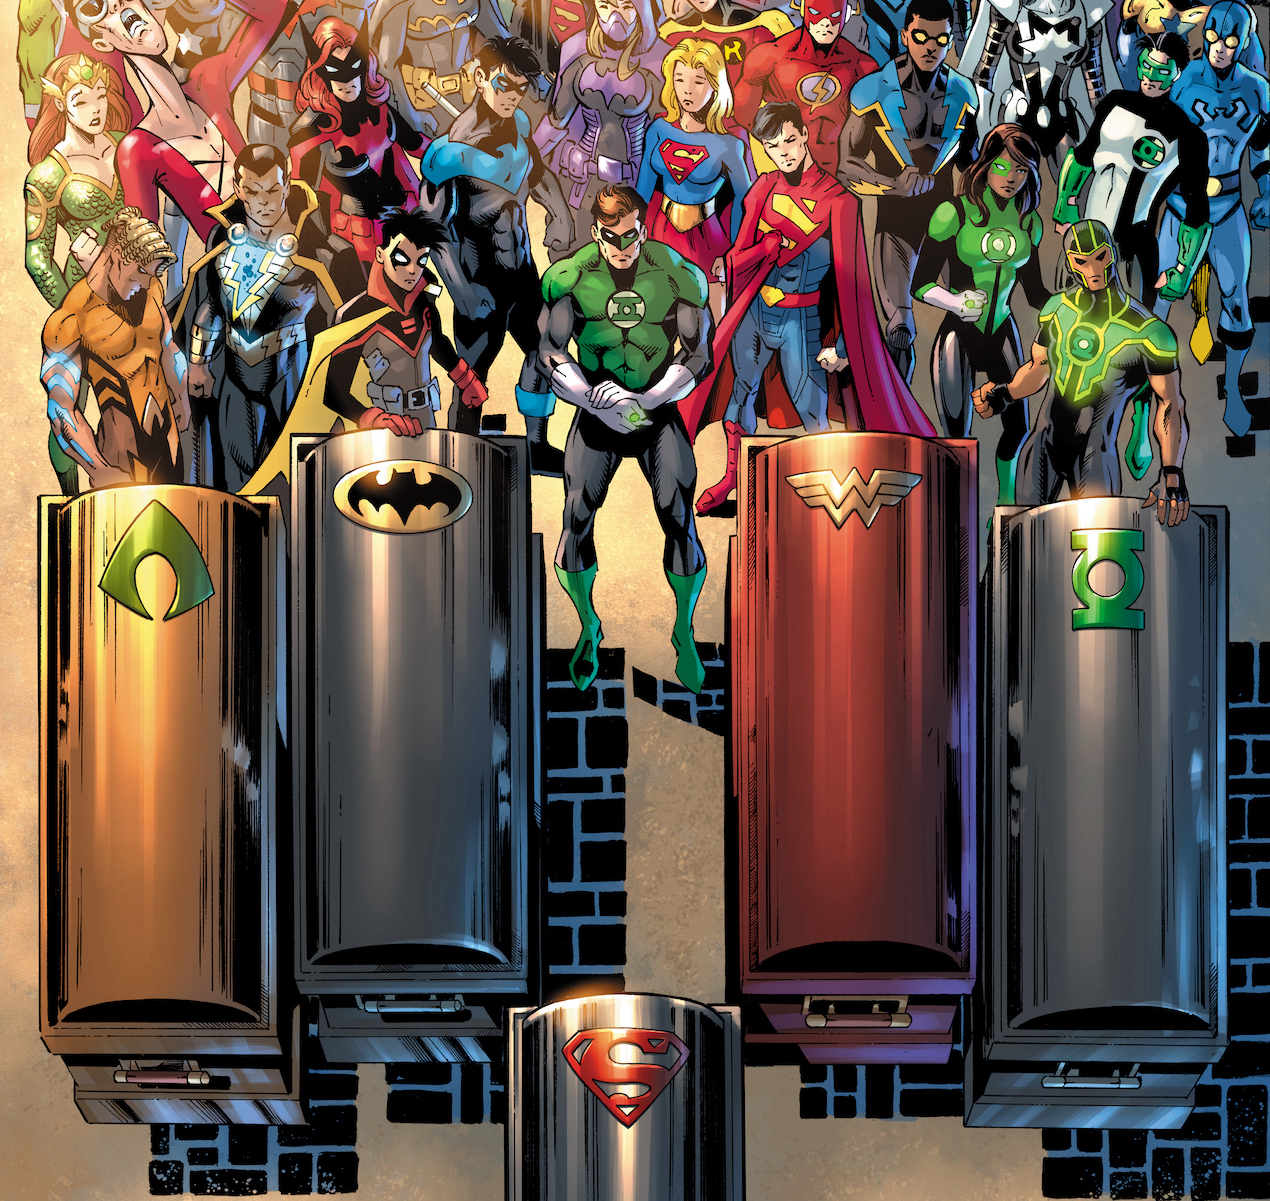 Josh Williamson kills his darlings in 'The Death of the Justice League' this April